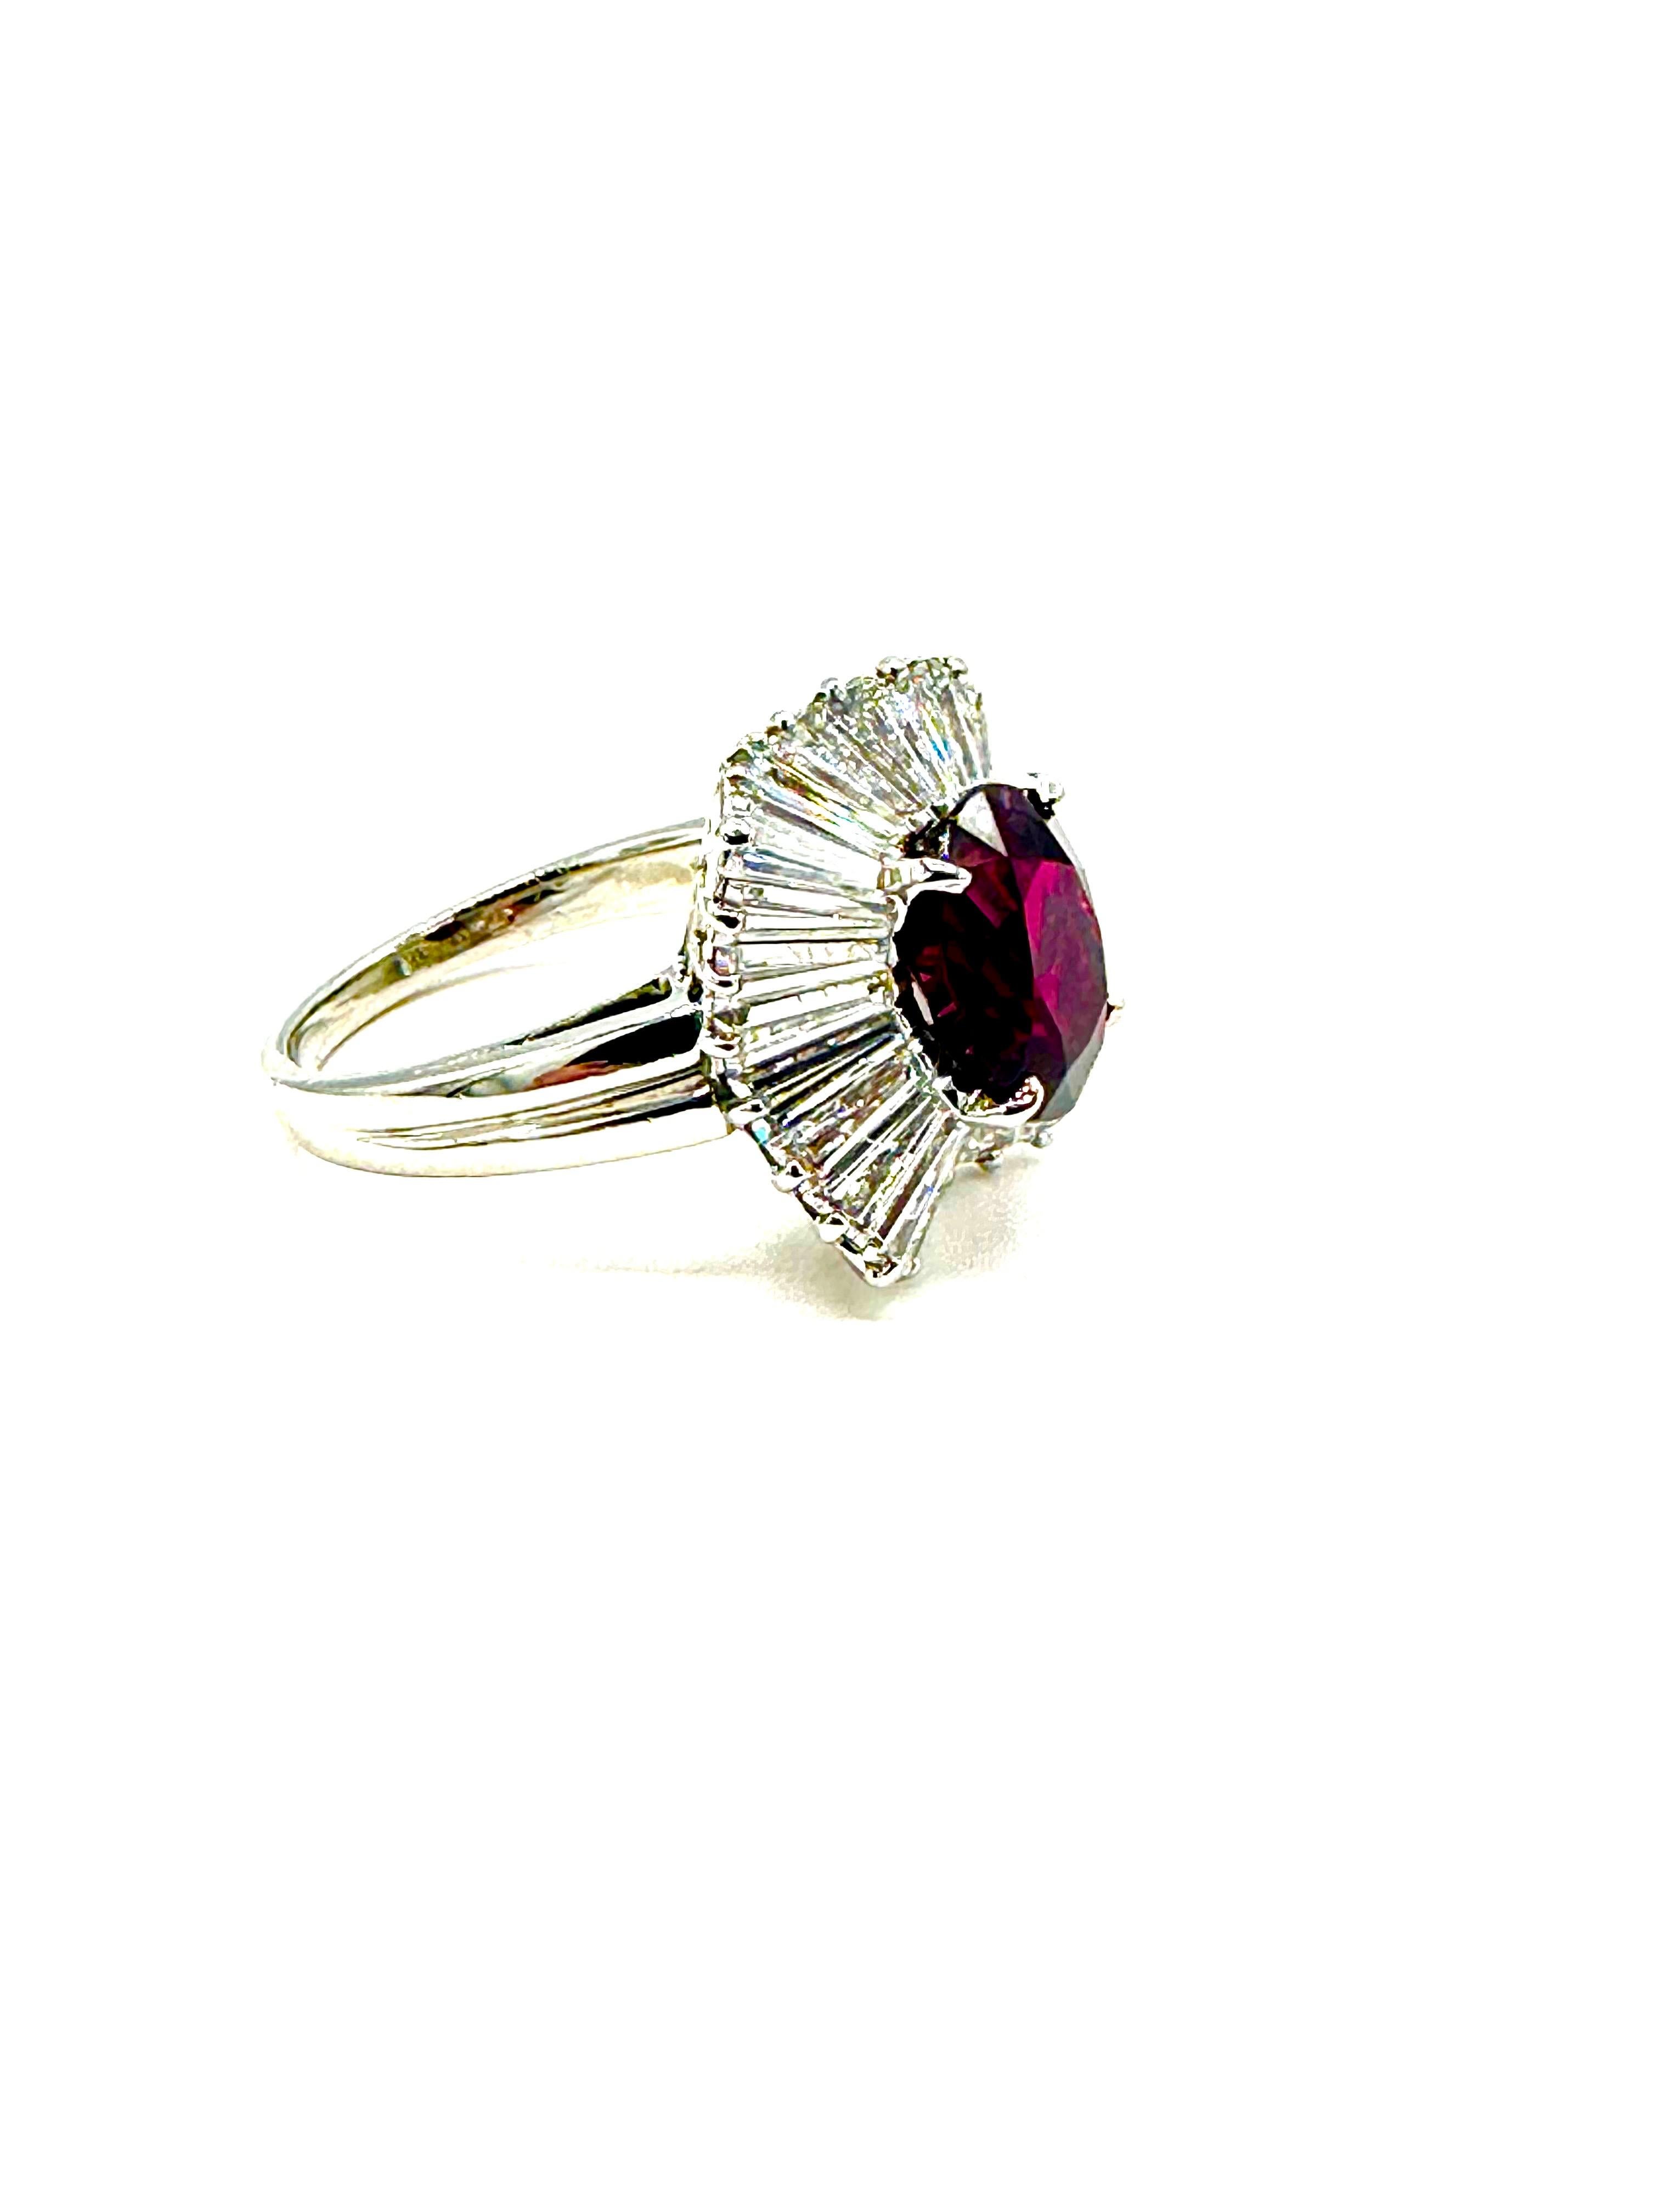 This is an amazingly beautiful ruby and diamond ballerina ring created by iconic designer, Oscar Heyman!  The 3.87 carat natural Ruby is set in four prongs, with a single row of tapered baguette Diamonds reaching outward, surrounding the Ruby in